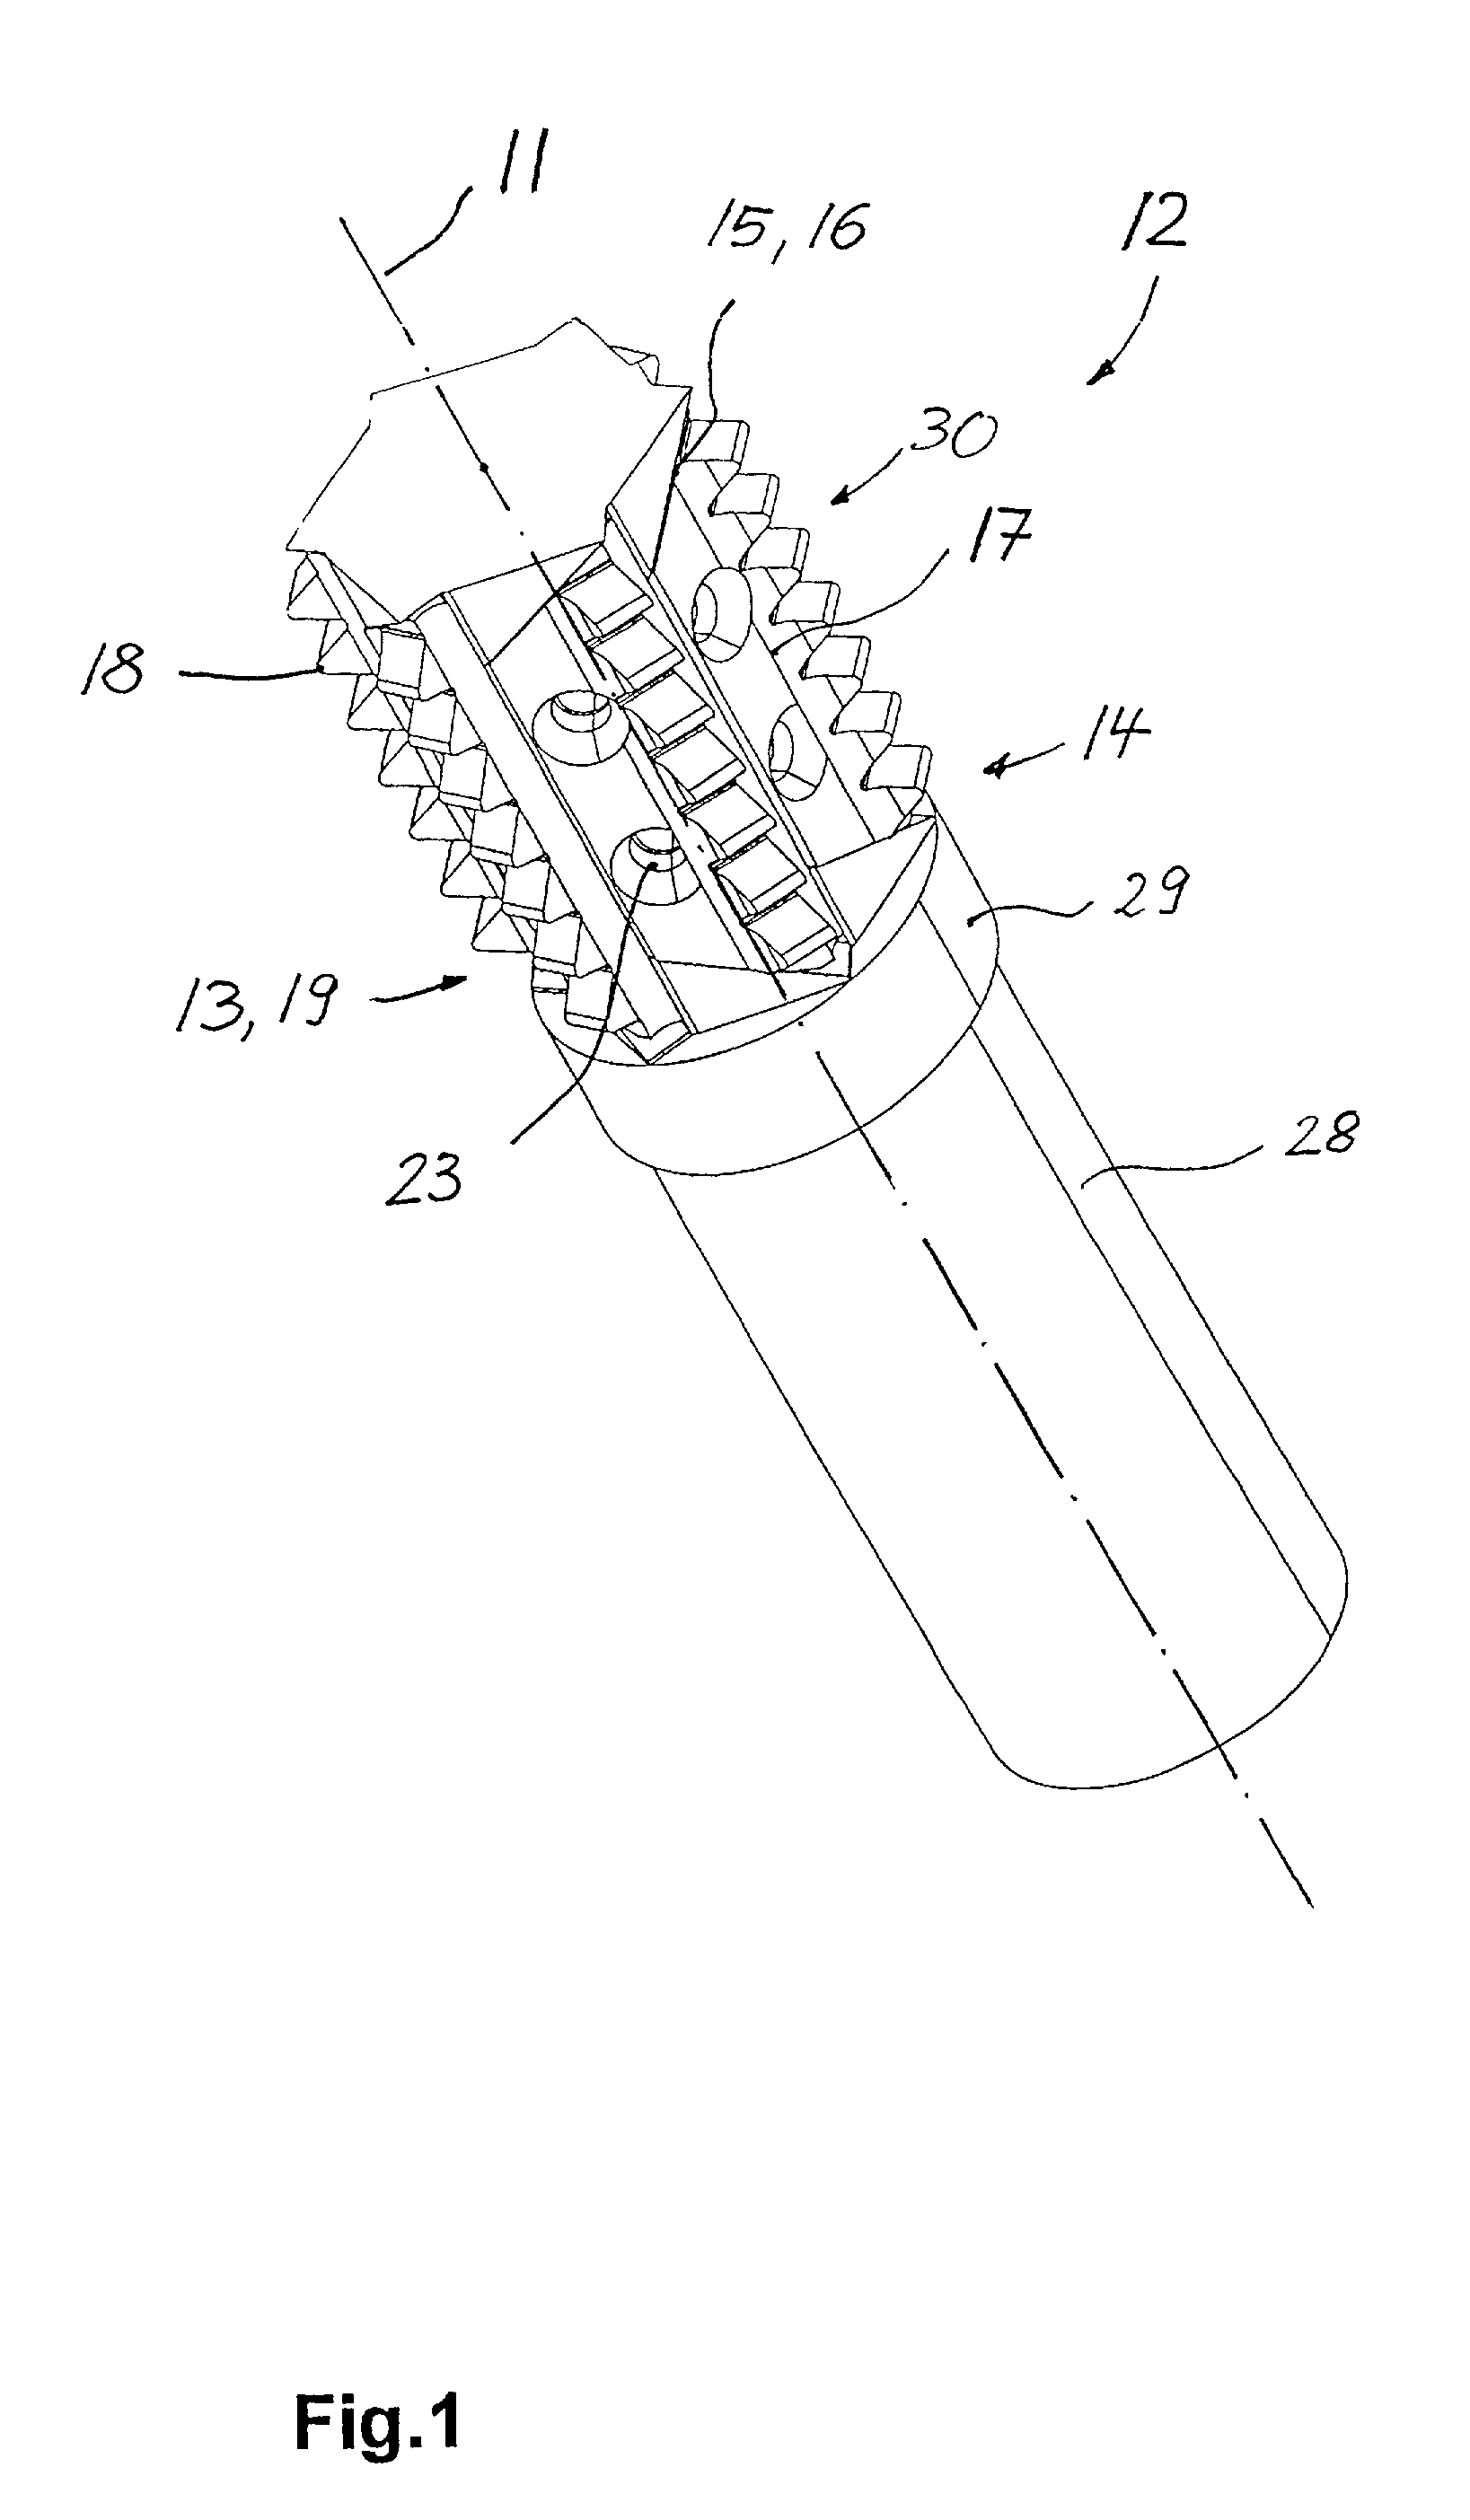 Milling tool and insert, particularly thread milling cutter